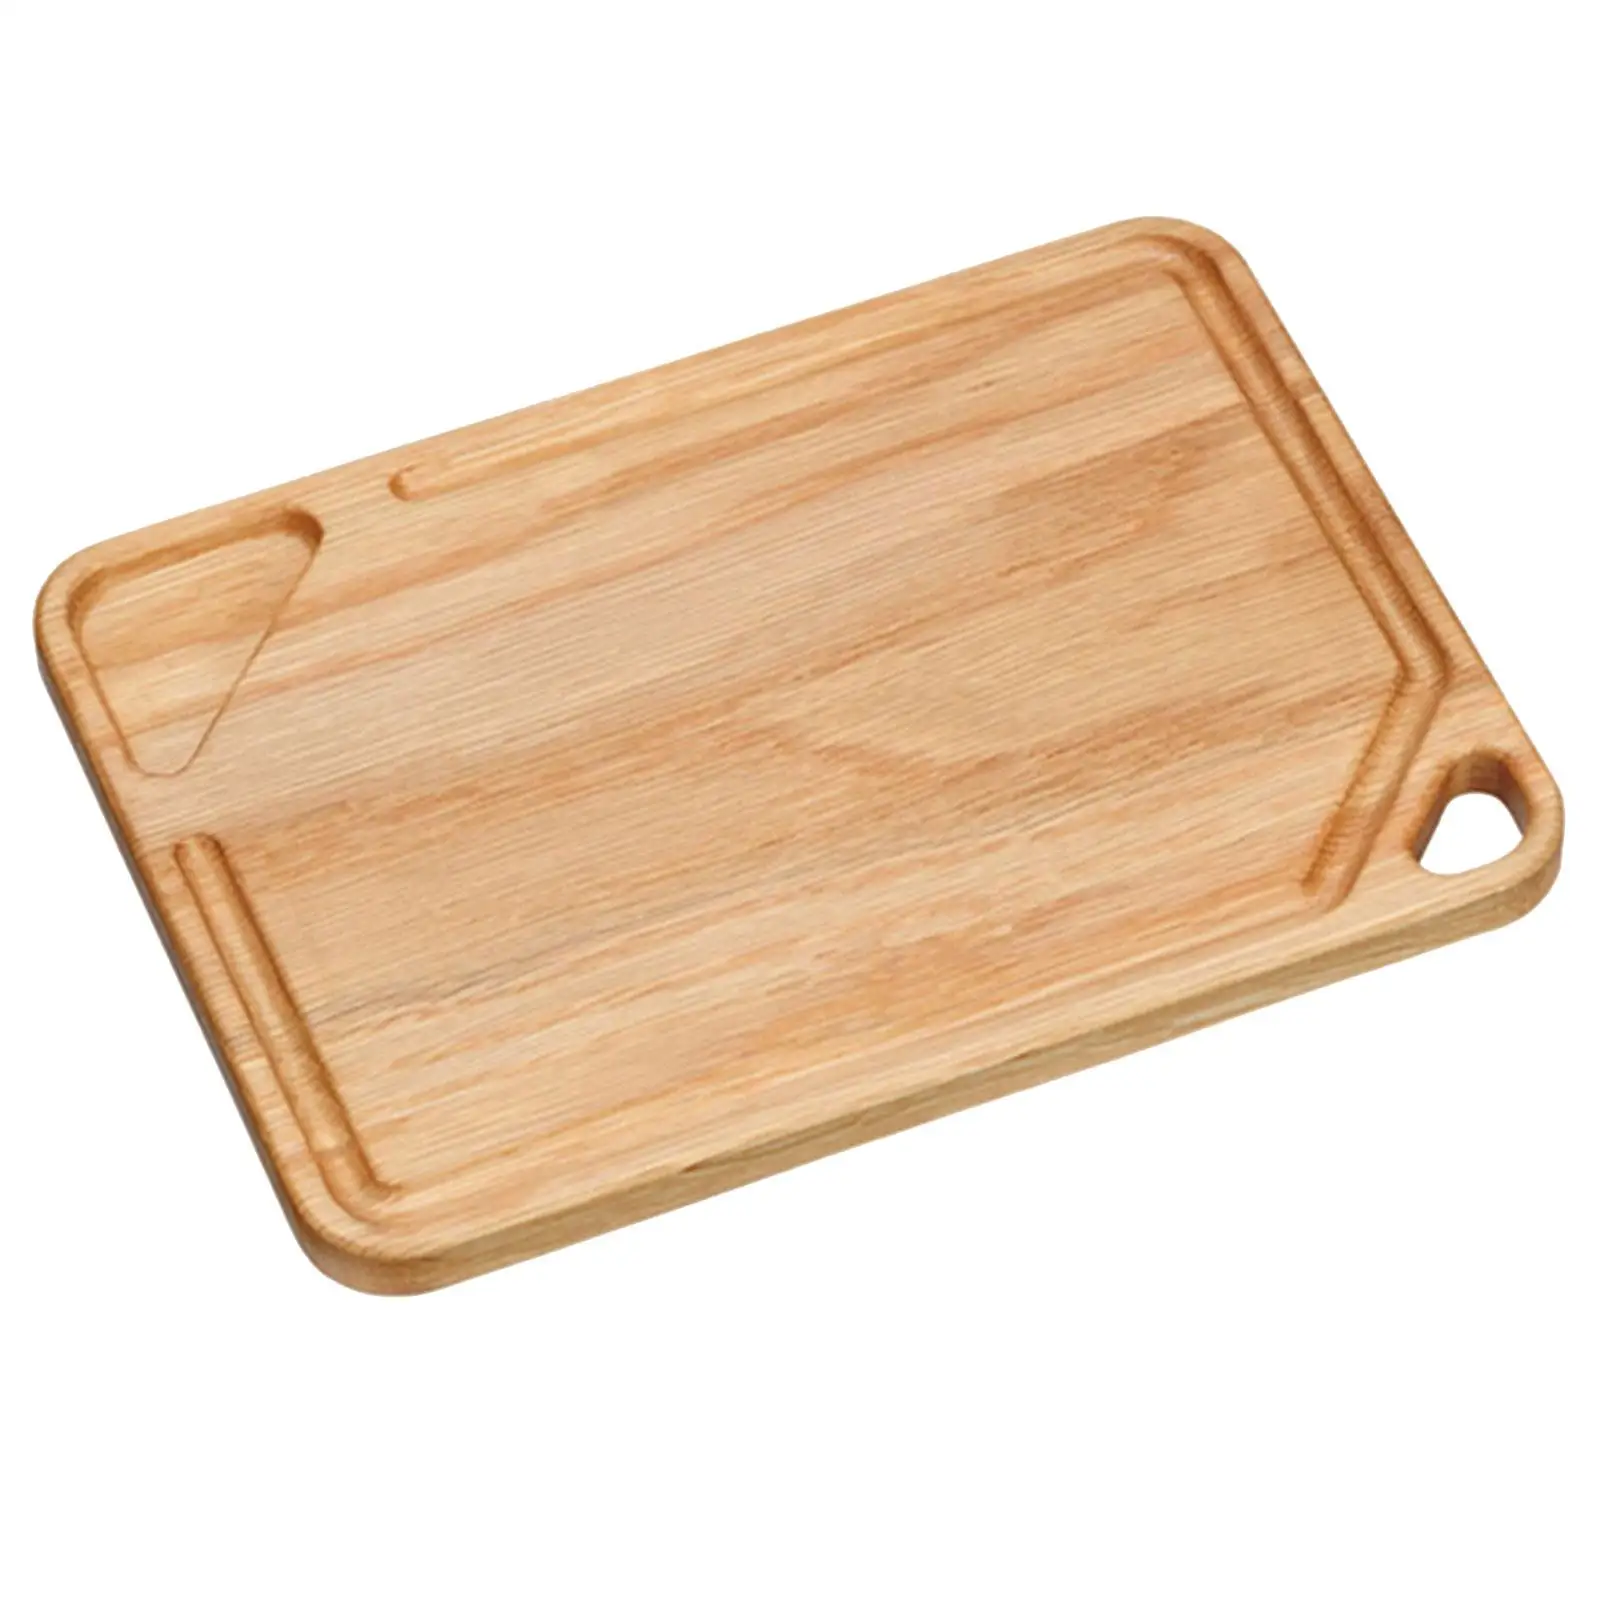 Household Cutting Board Tray Serving Tray Multipurpose Japanese Wooden Tray Food Tray for Vegetables Steak Fruits Meat